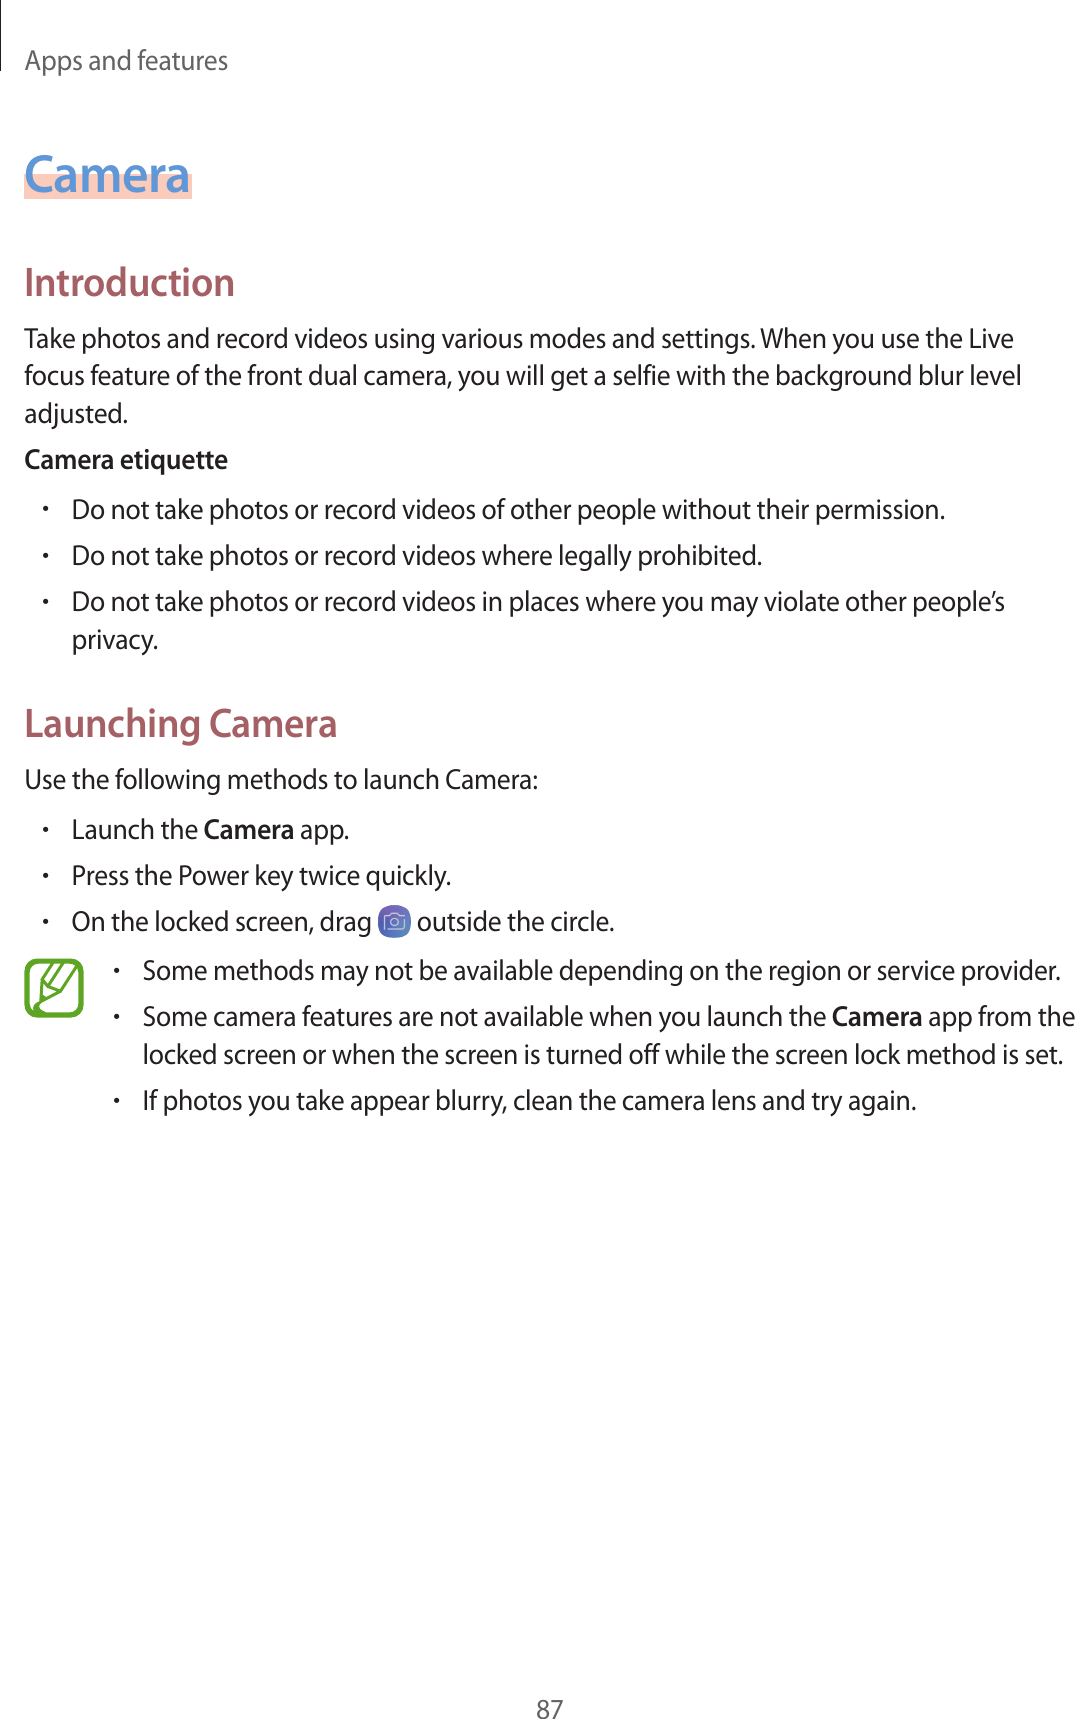 Apps and features87CameraIntroductionTake photos and record videos using various modes and settings. When you use the Live focus feature of the front dual camera, you will get a selfie with the background blur level adjusted.Camera etiquette•Do not take photos or record videos of other people without their permission.•Do not take photos or record videos where legally prohibited.•Do not take photos or record videos in places where you may violate other people’s privacy.Launching CameraUse the following methods to launch Camera:•Launch the Camera app.•Press the Power key twice quickly.•On the locked screen, drag   outside the circle.•Some methods may not be available depending on the region or service provider.•Some camera features are not available when you launch the Camera app from the locked screen or when the screen is turned off while the screen lock method is set.•If photos you take appear blurry, clean the camera lens and try again.